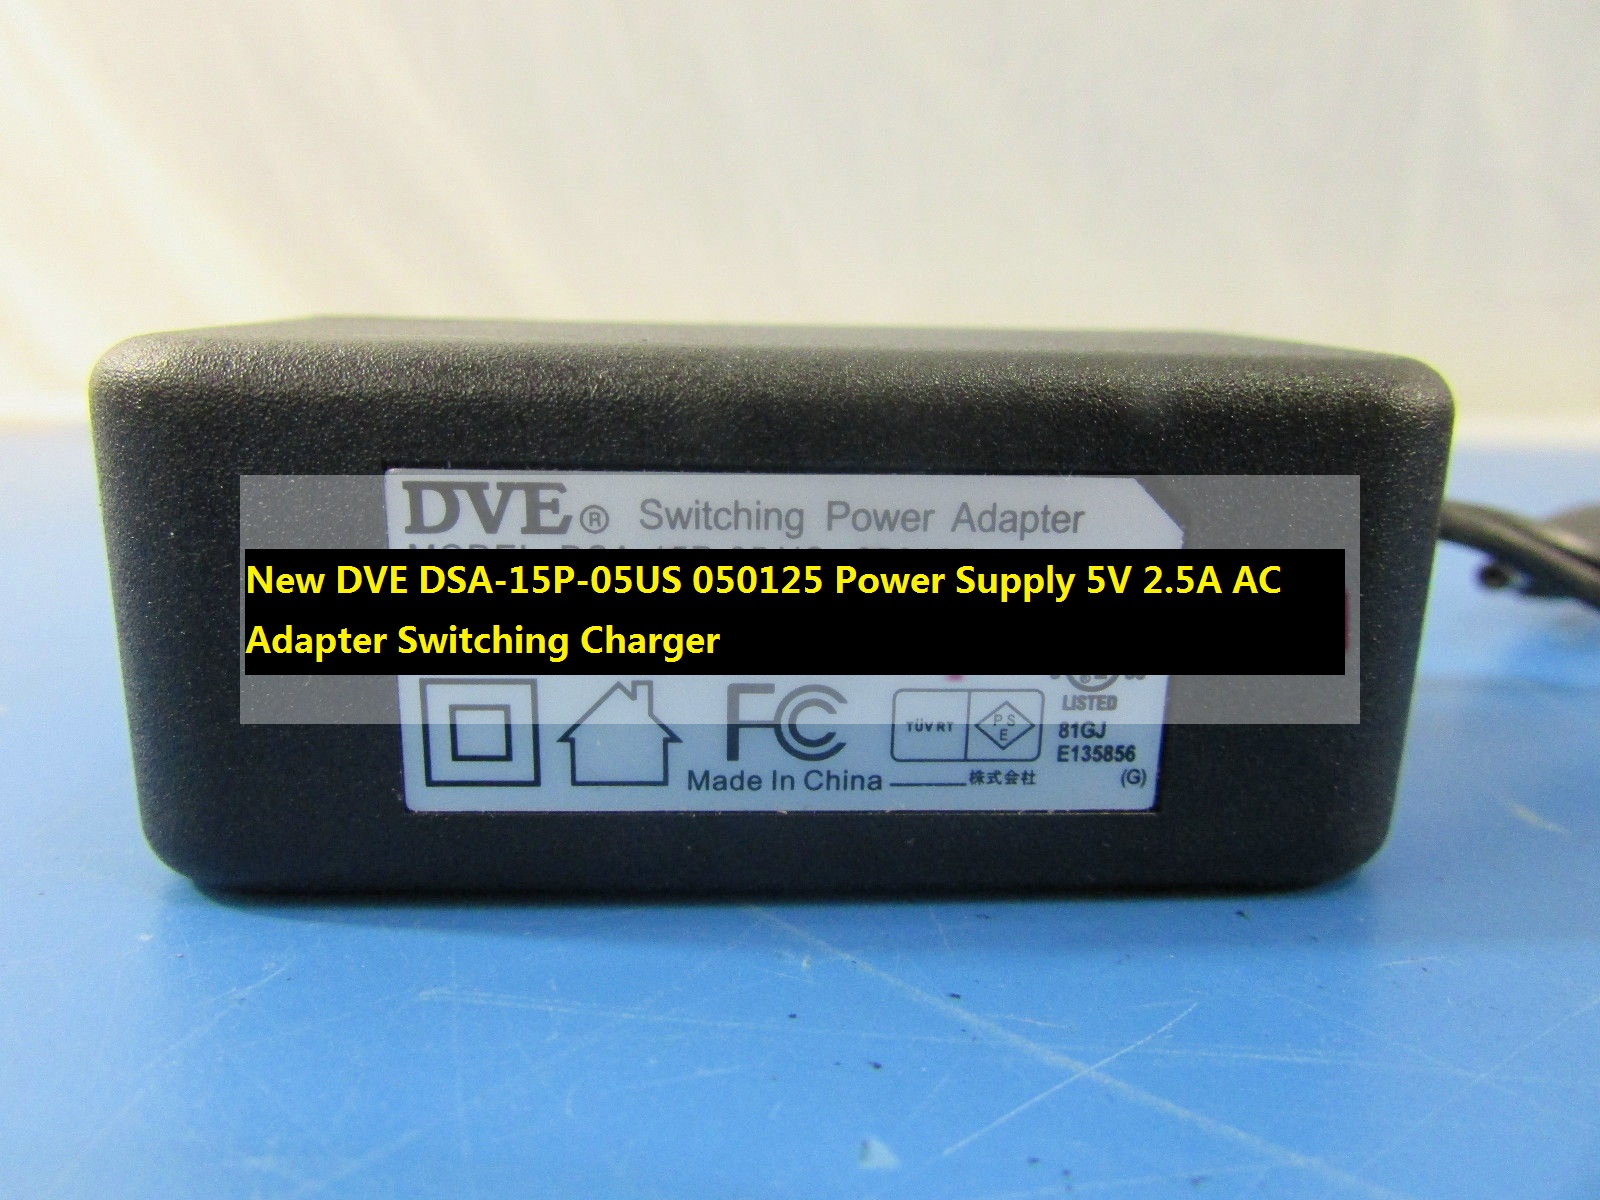 *Brand NEW*5V 2.5A AC Adapter DVE DSA-15P-05US 050125 Power Supply Switching